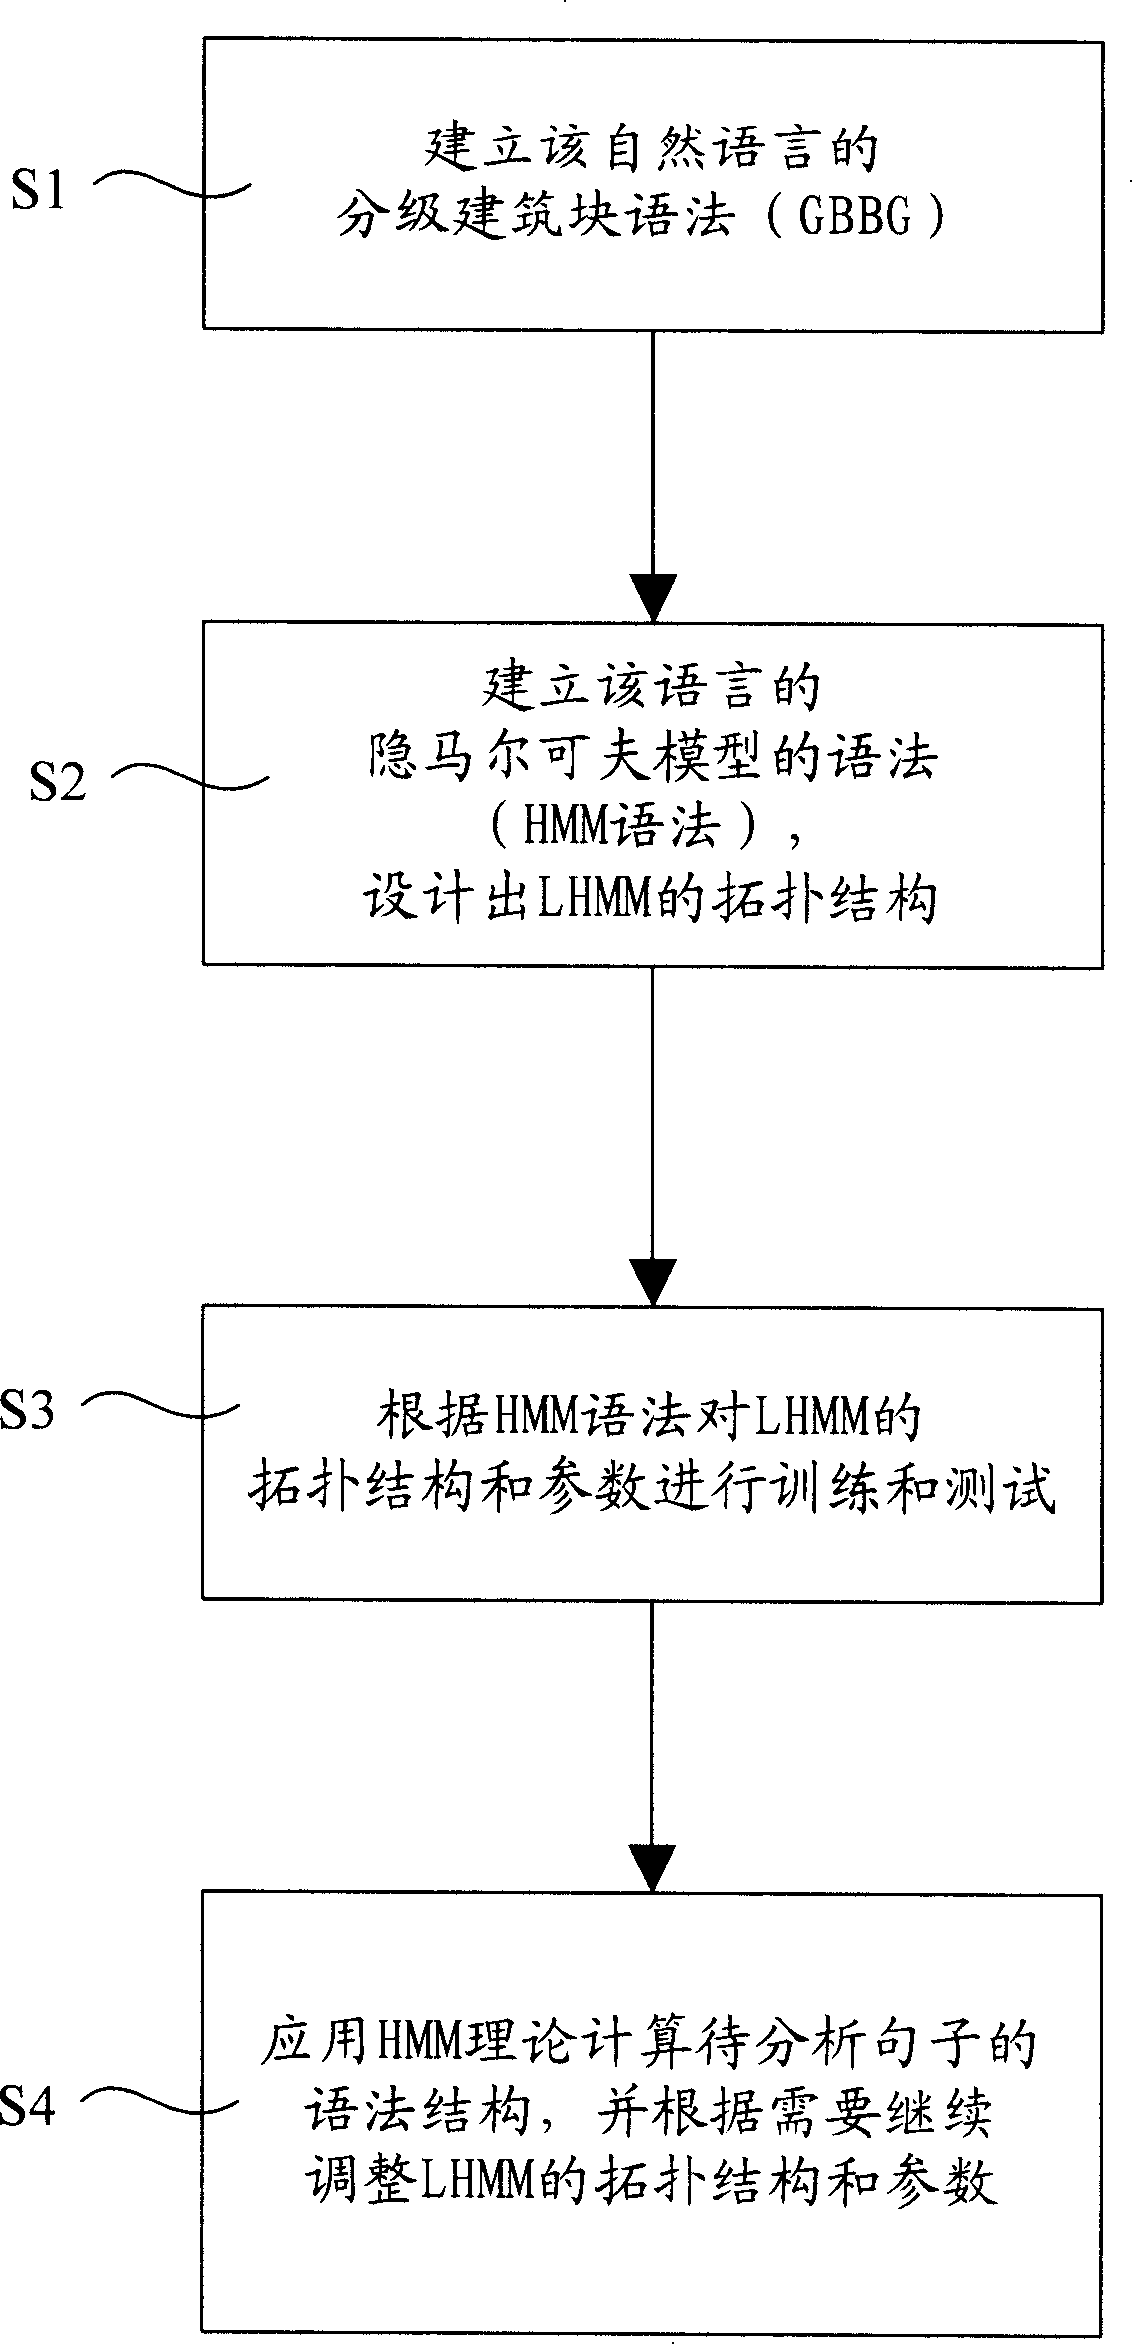 Method for calculating language structure, executing participle, machine translation and speech recognition using HMM